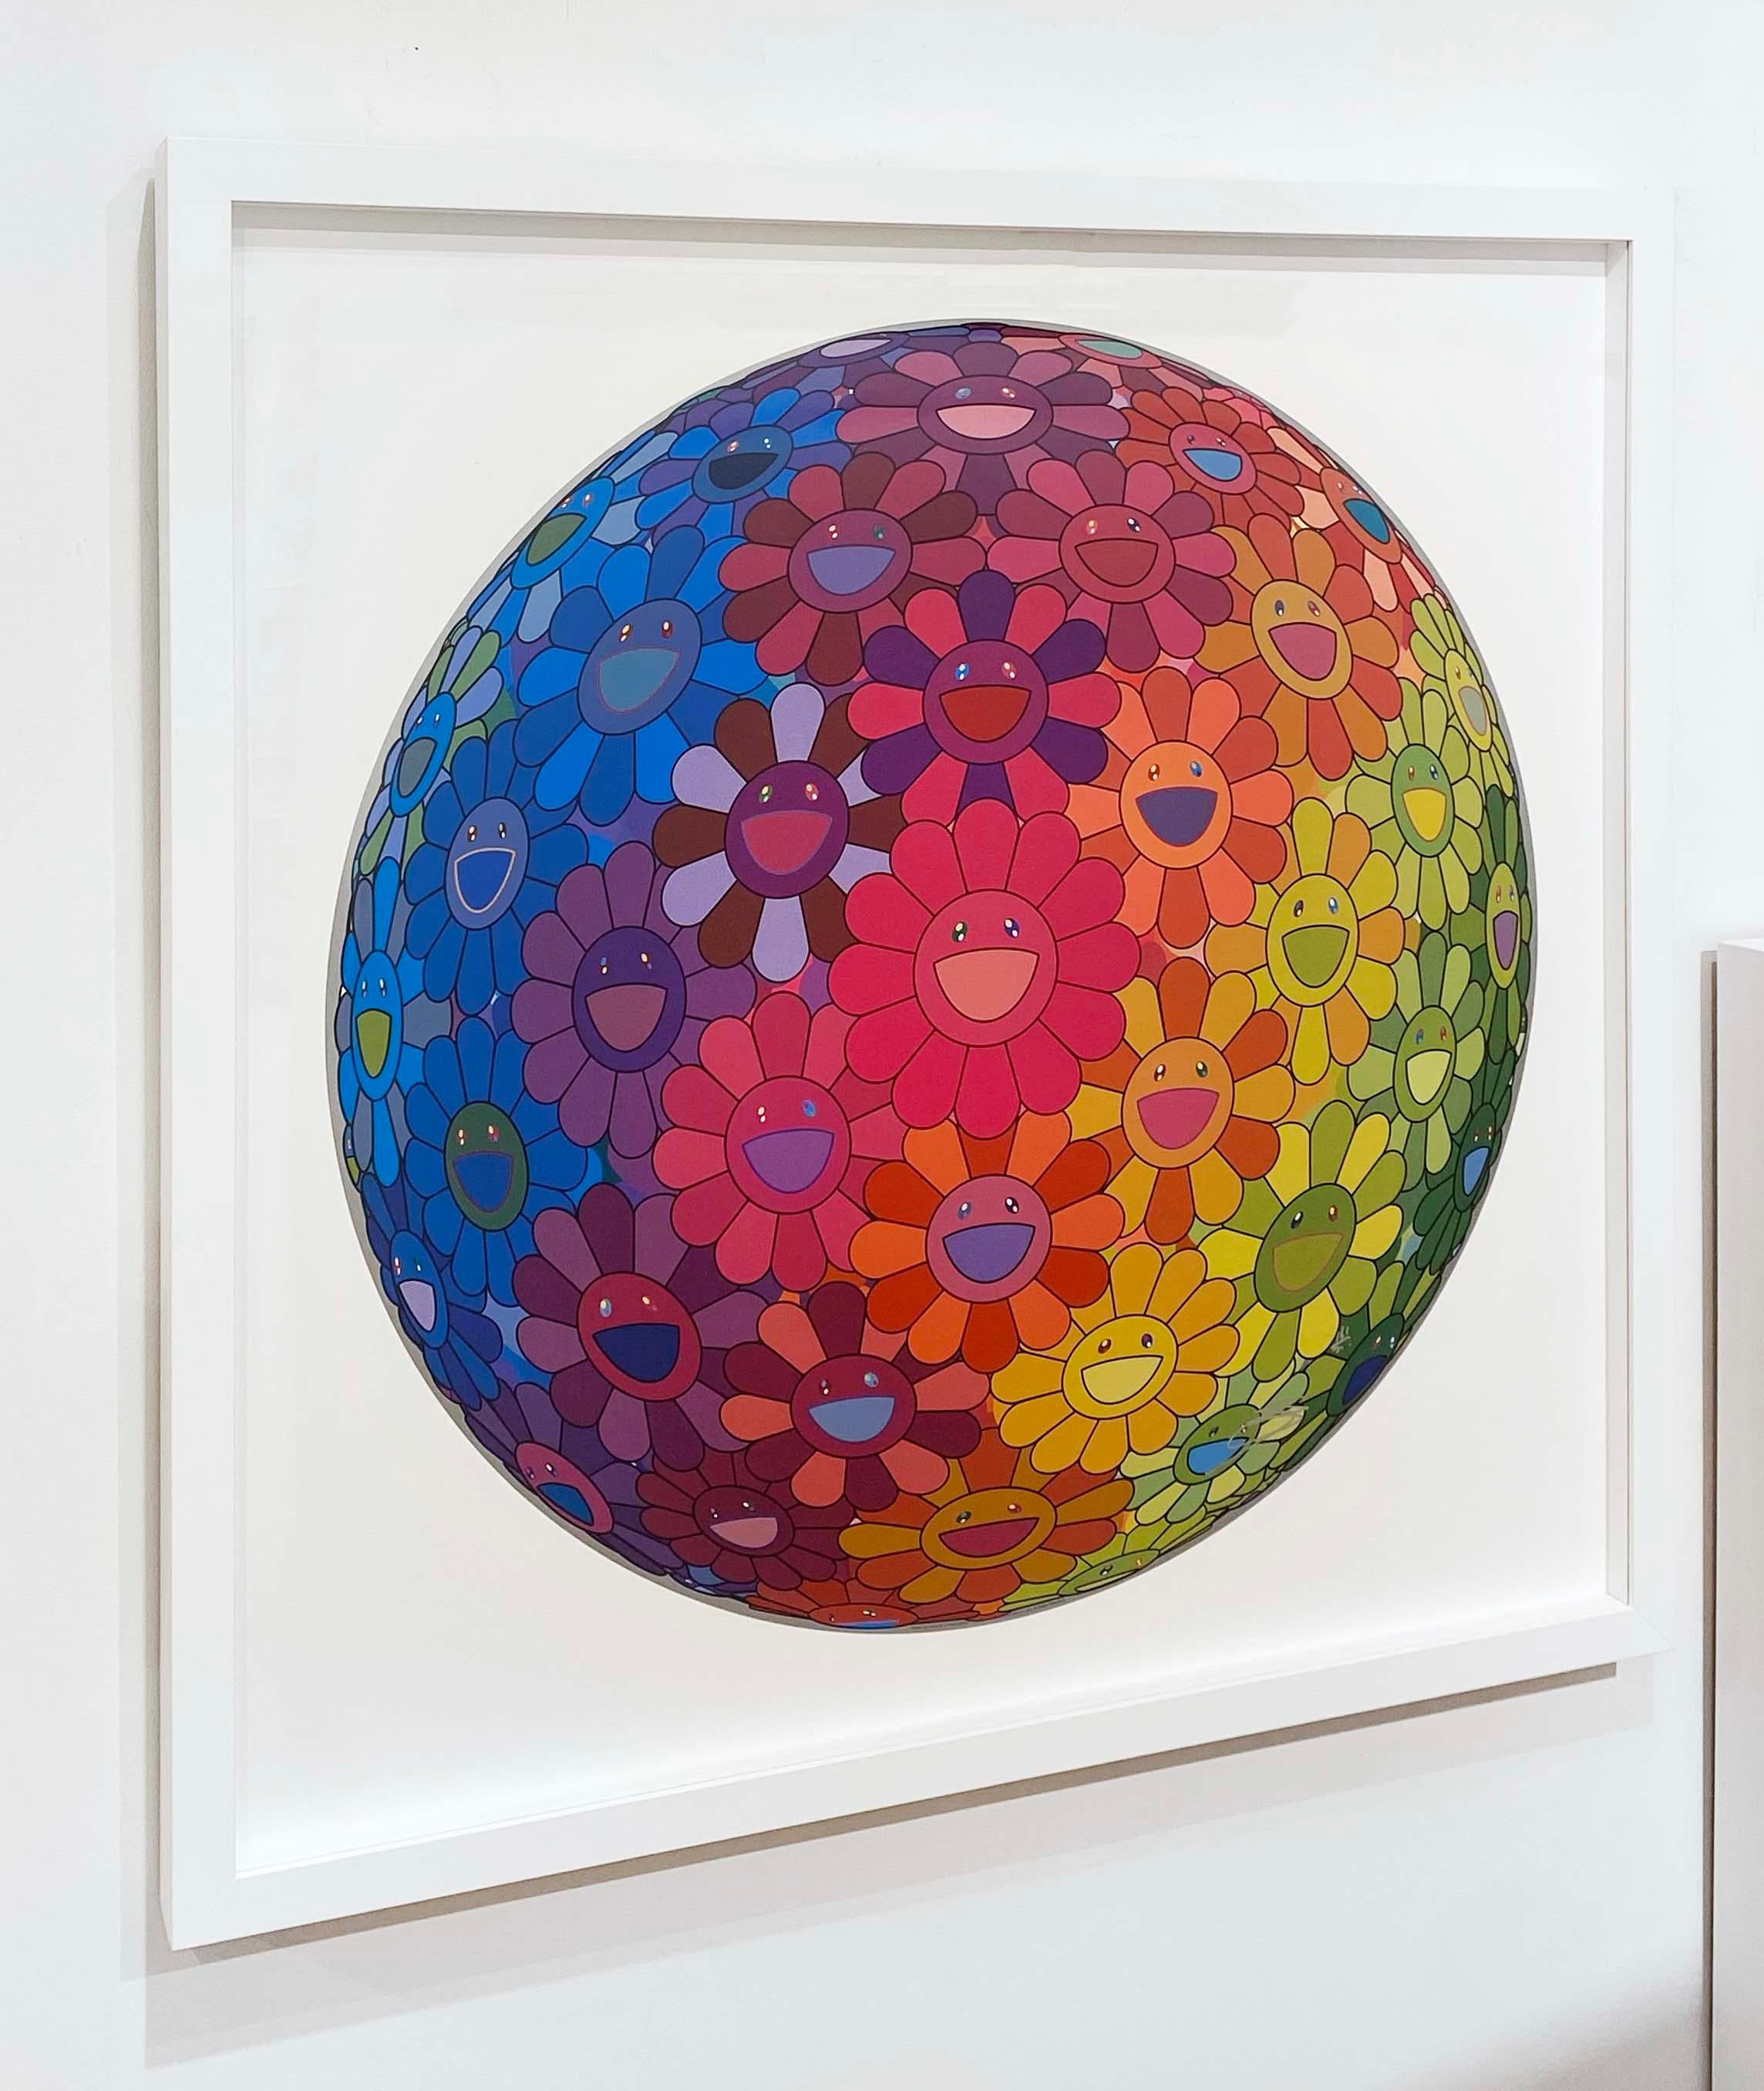 Artist:  Murakami, Takashi
Title:  Inside The Rainbow Heart
Date:  2022
Medium:  Offset Lithograph in colors on smooth wove paper
Unframed Dimensions:  28